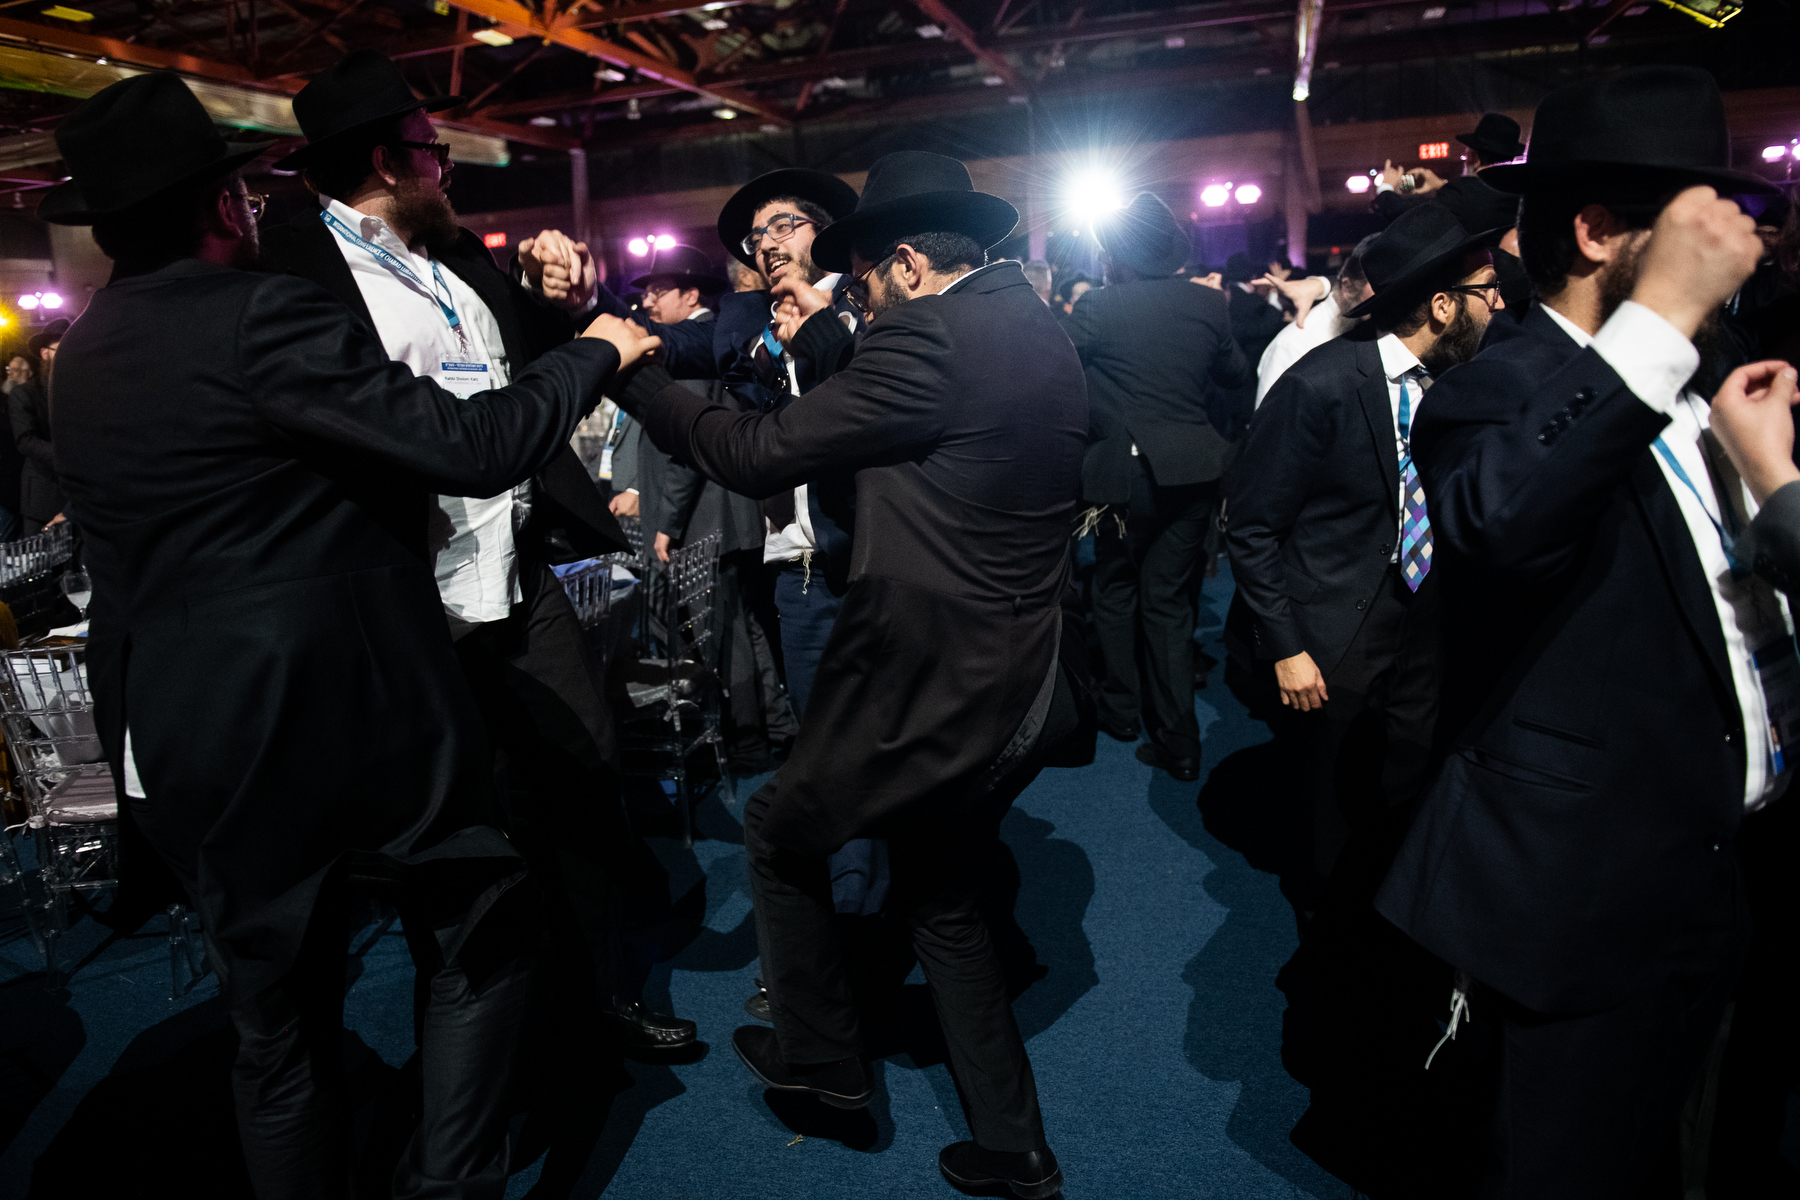  Thousands of Chabad-Lubavitch rabbis and their guests dance after a roll call of all the Chabad emissaries a banquet in Suffern, NY. Each year, the International Conference of Chabad-Lubavitch Shluchim, or emissaries, takes place in the New York Cit